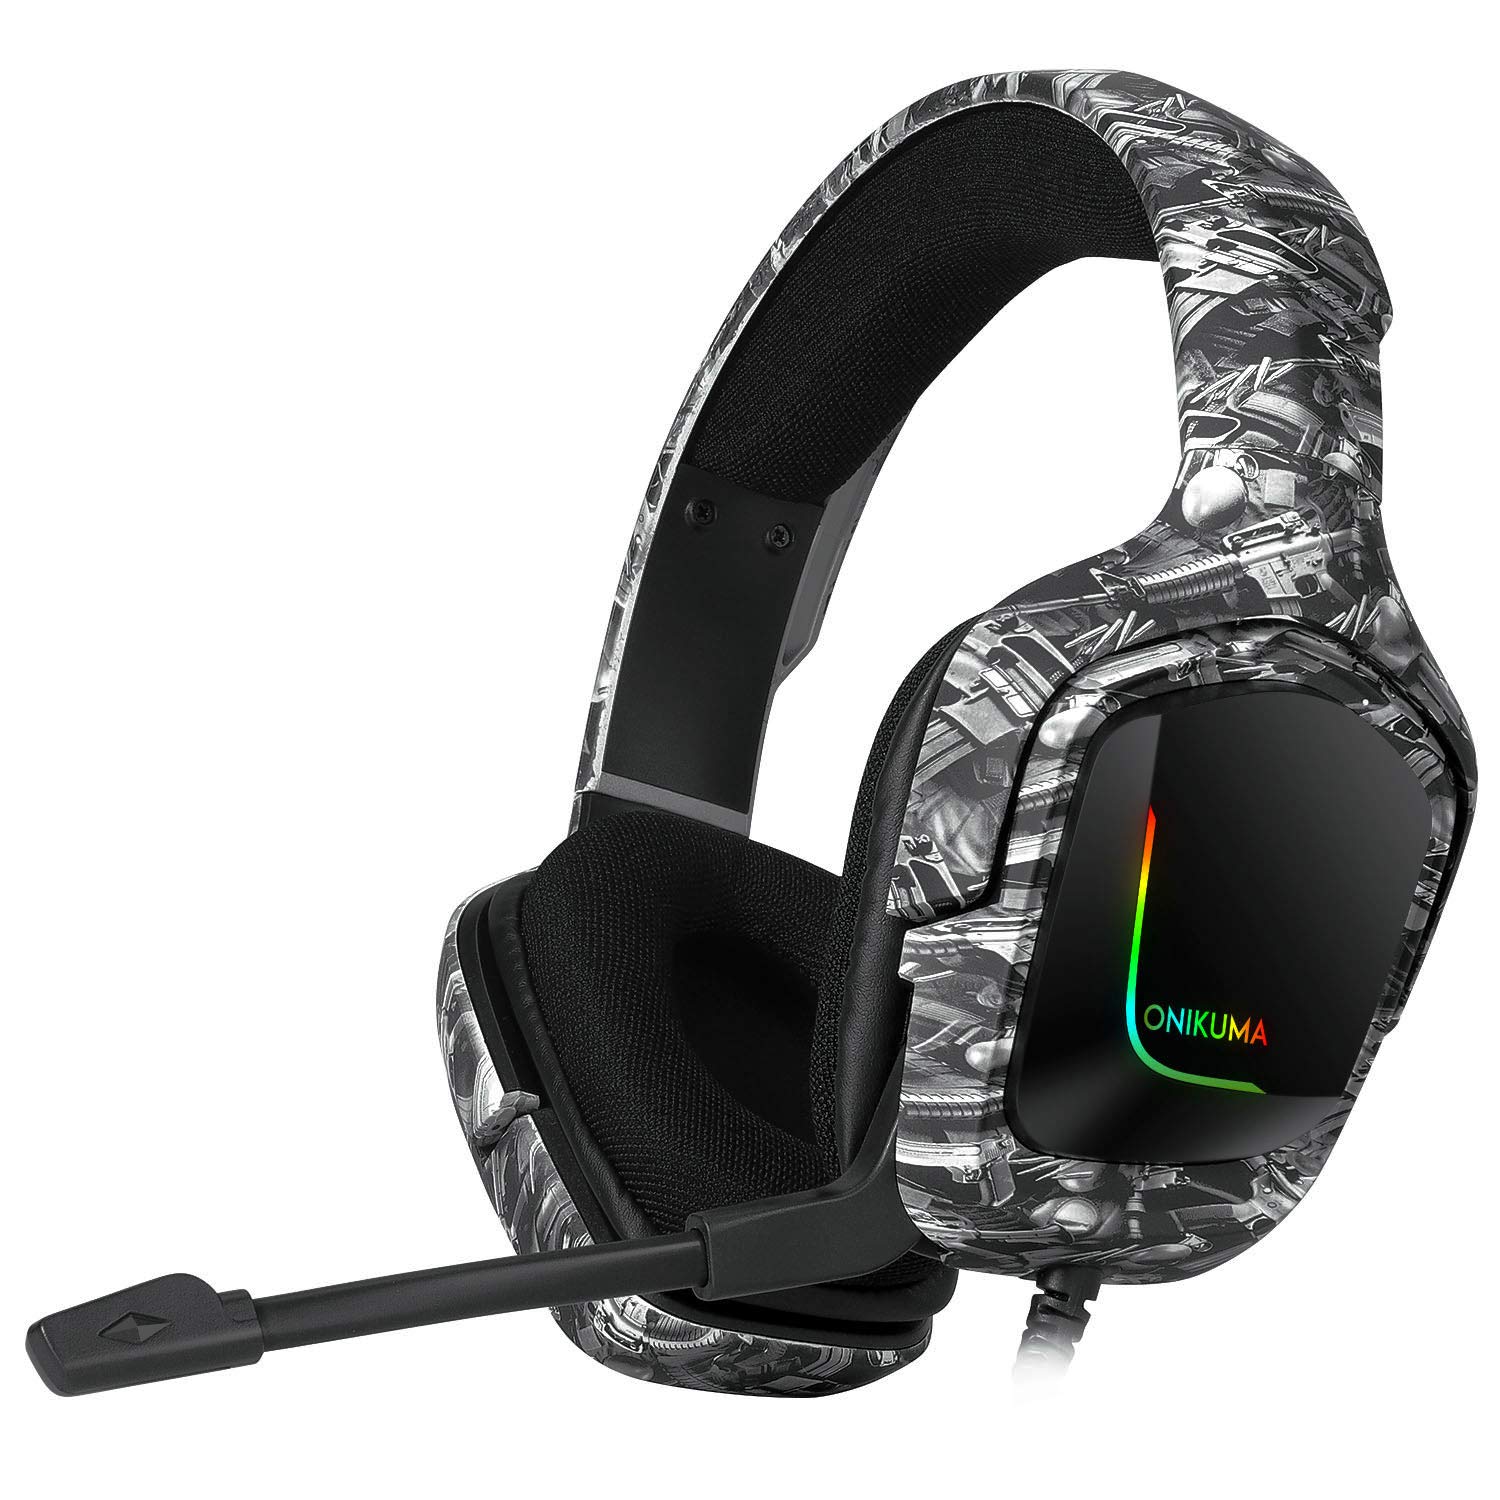 Gaming Headset with Surround Sound PS4 Headphones with Mic Works with Xbox One PC,RGB Lightweight Soft Earmuffs & Volume Control